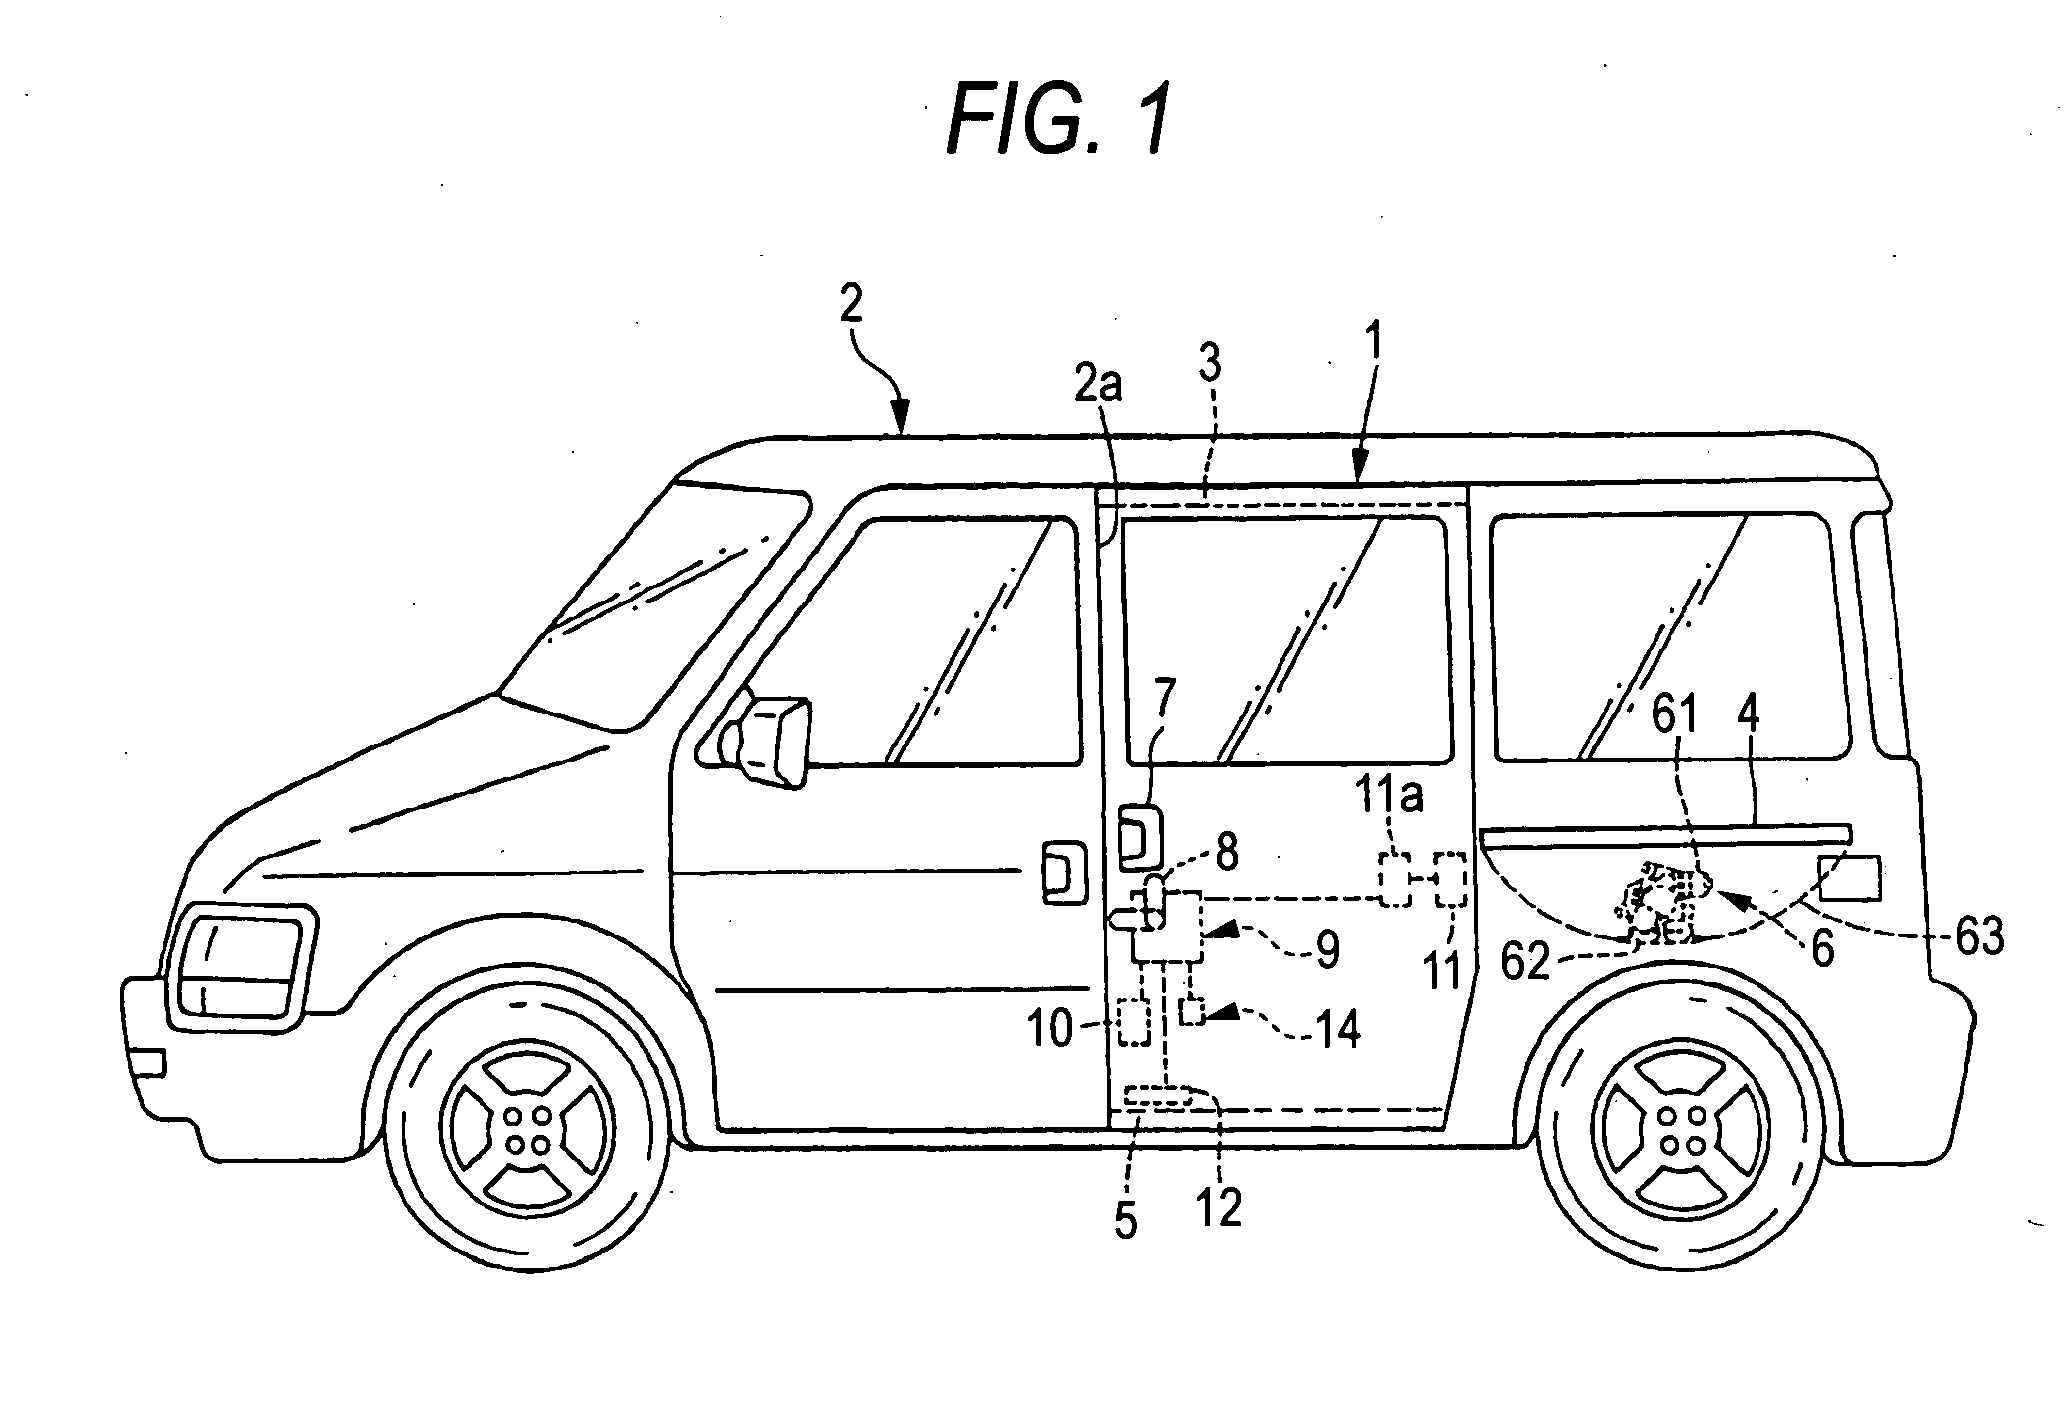 Automotive childproof safety lock control apparatus